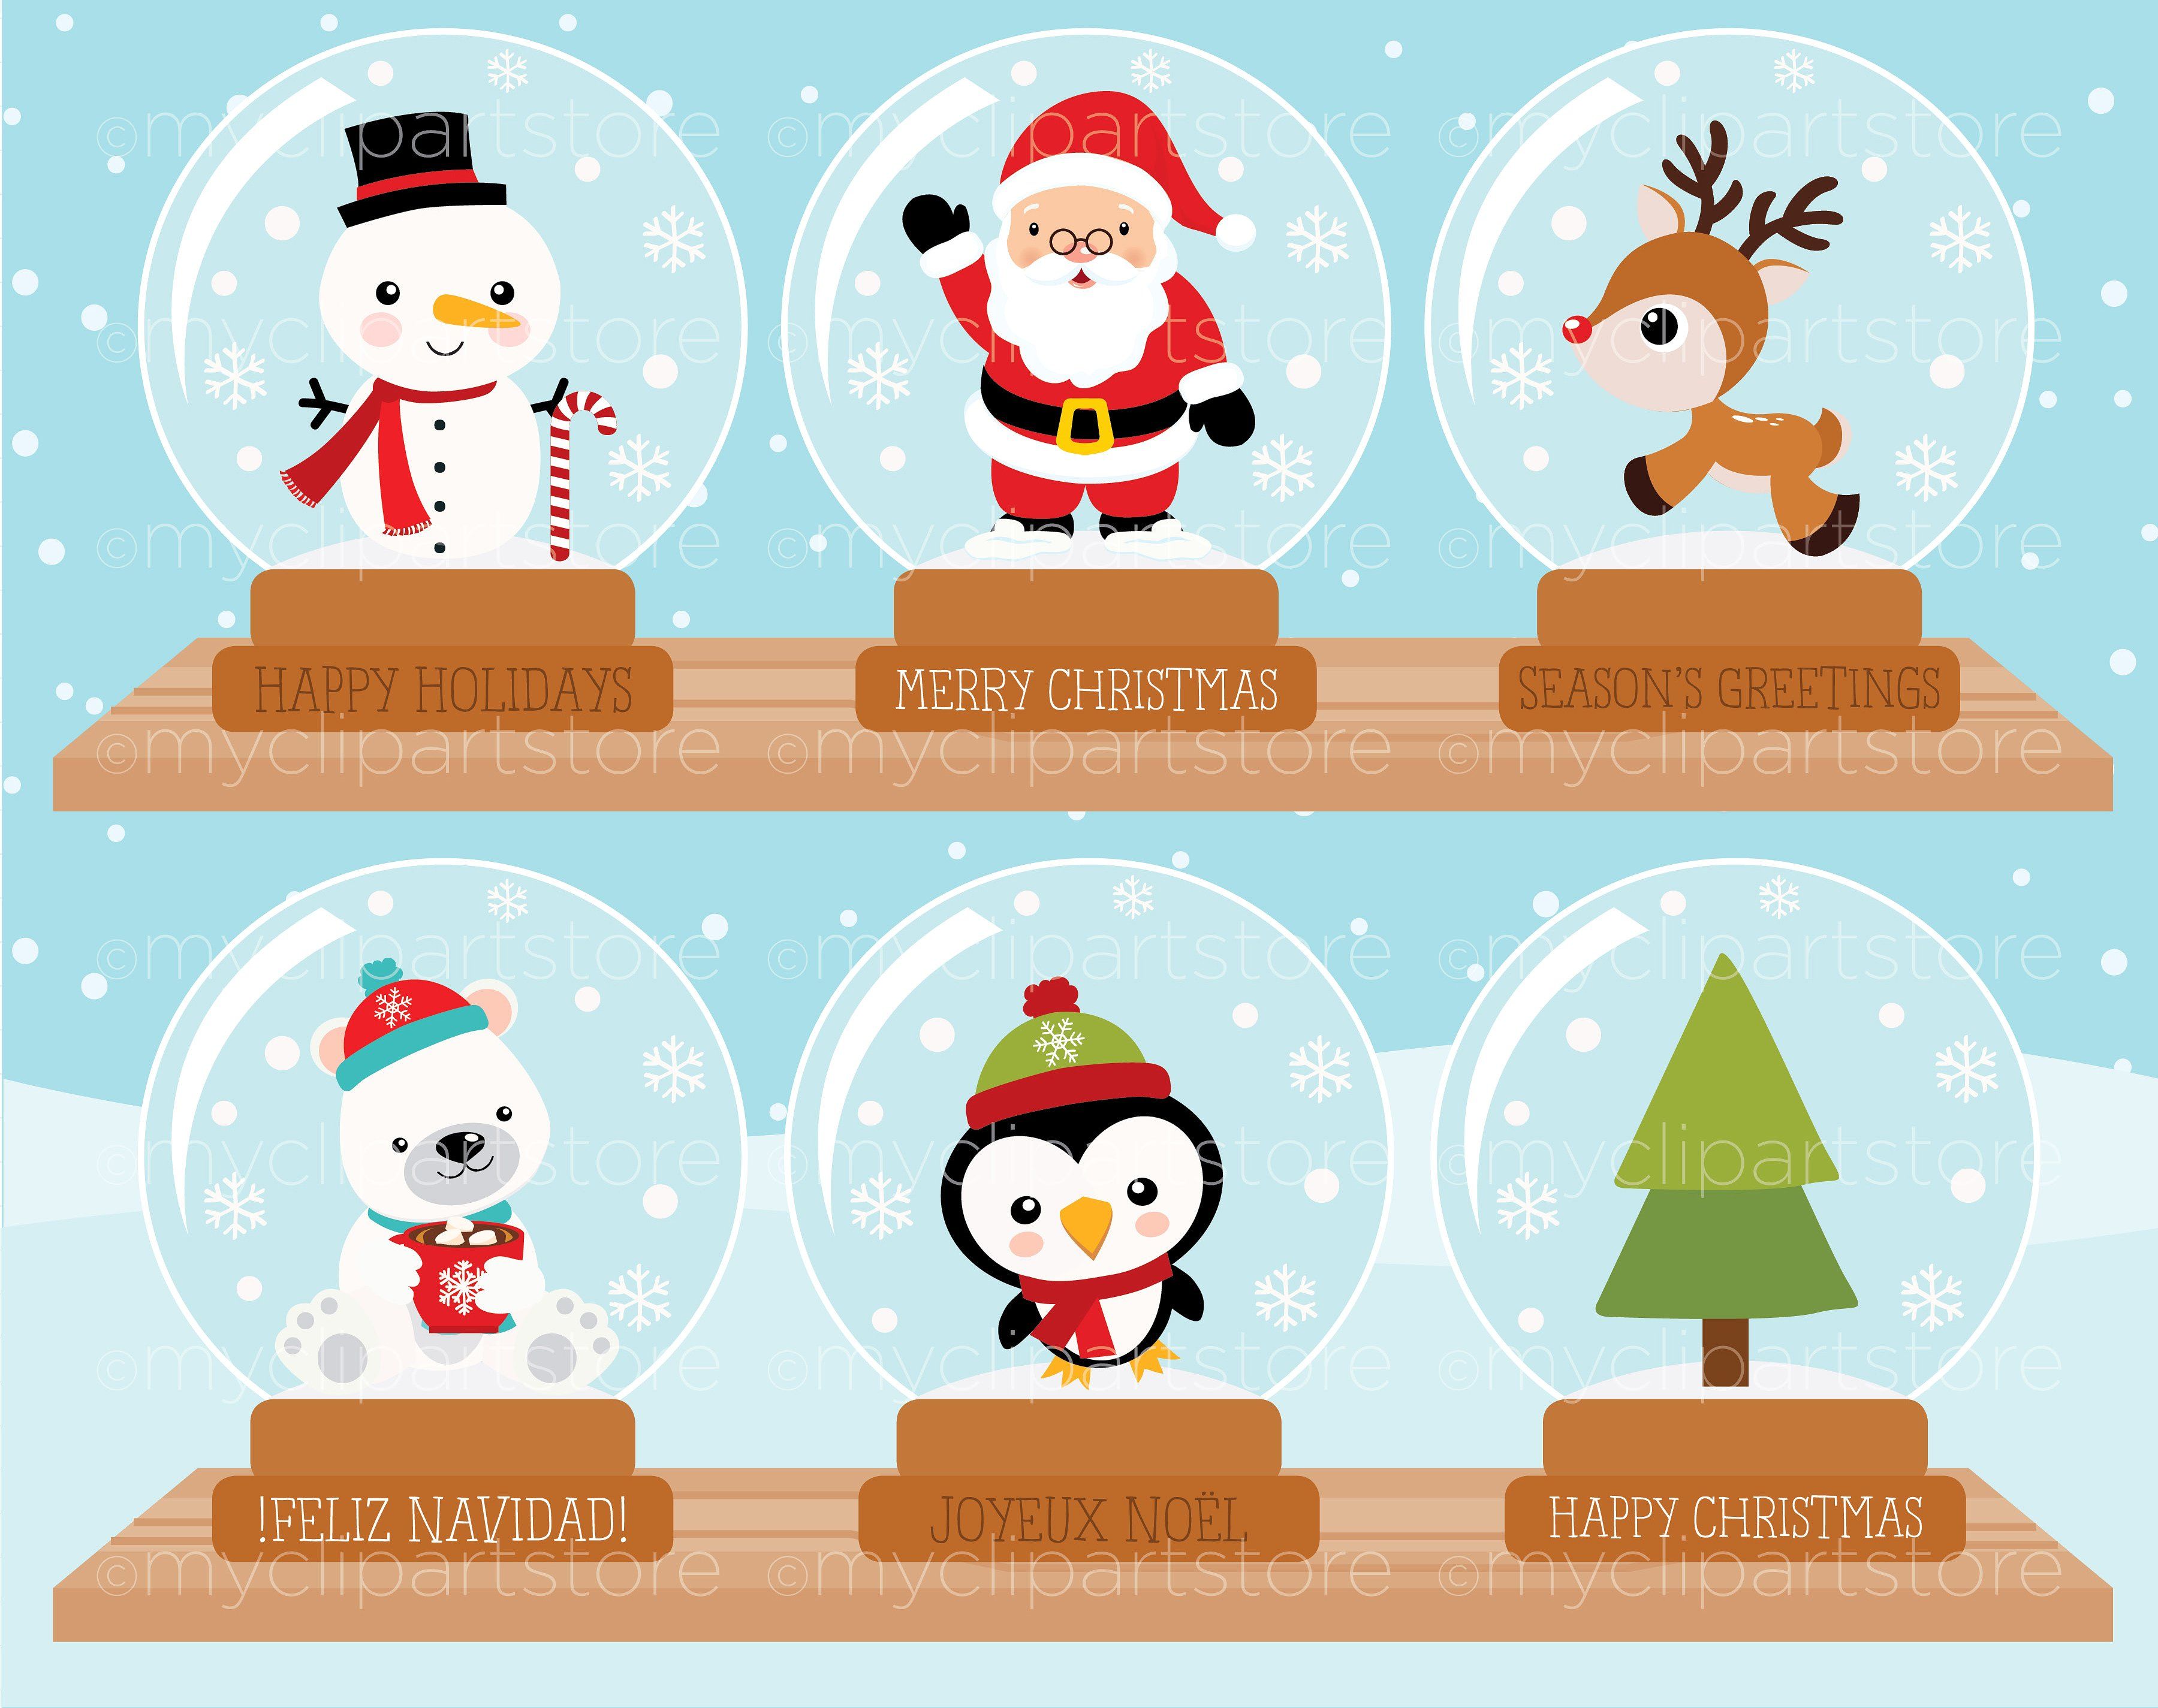 Christmas, Snow Globes Clipart by MyClipArtStore on